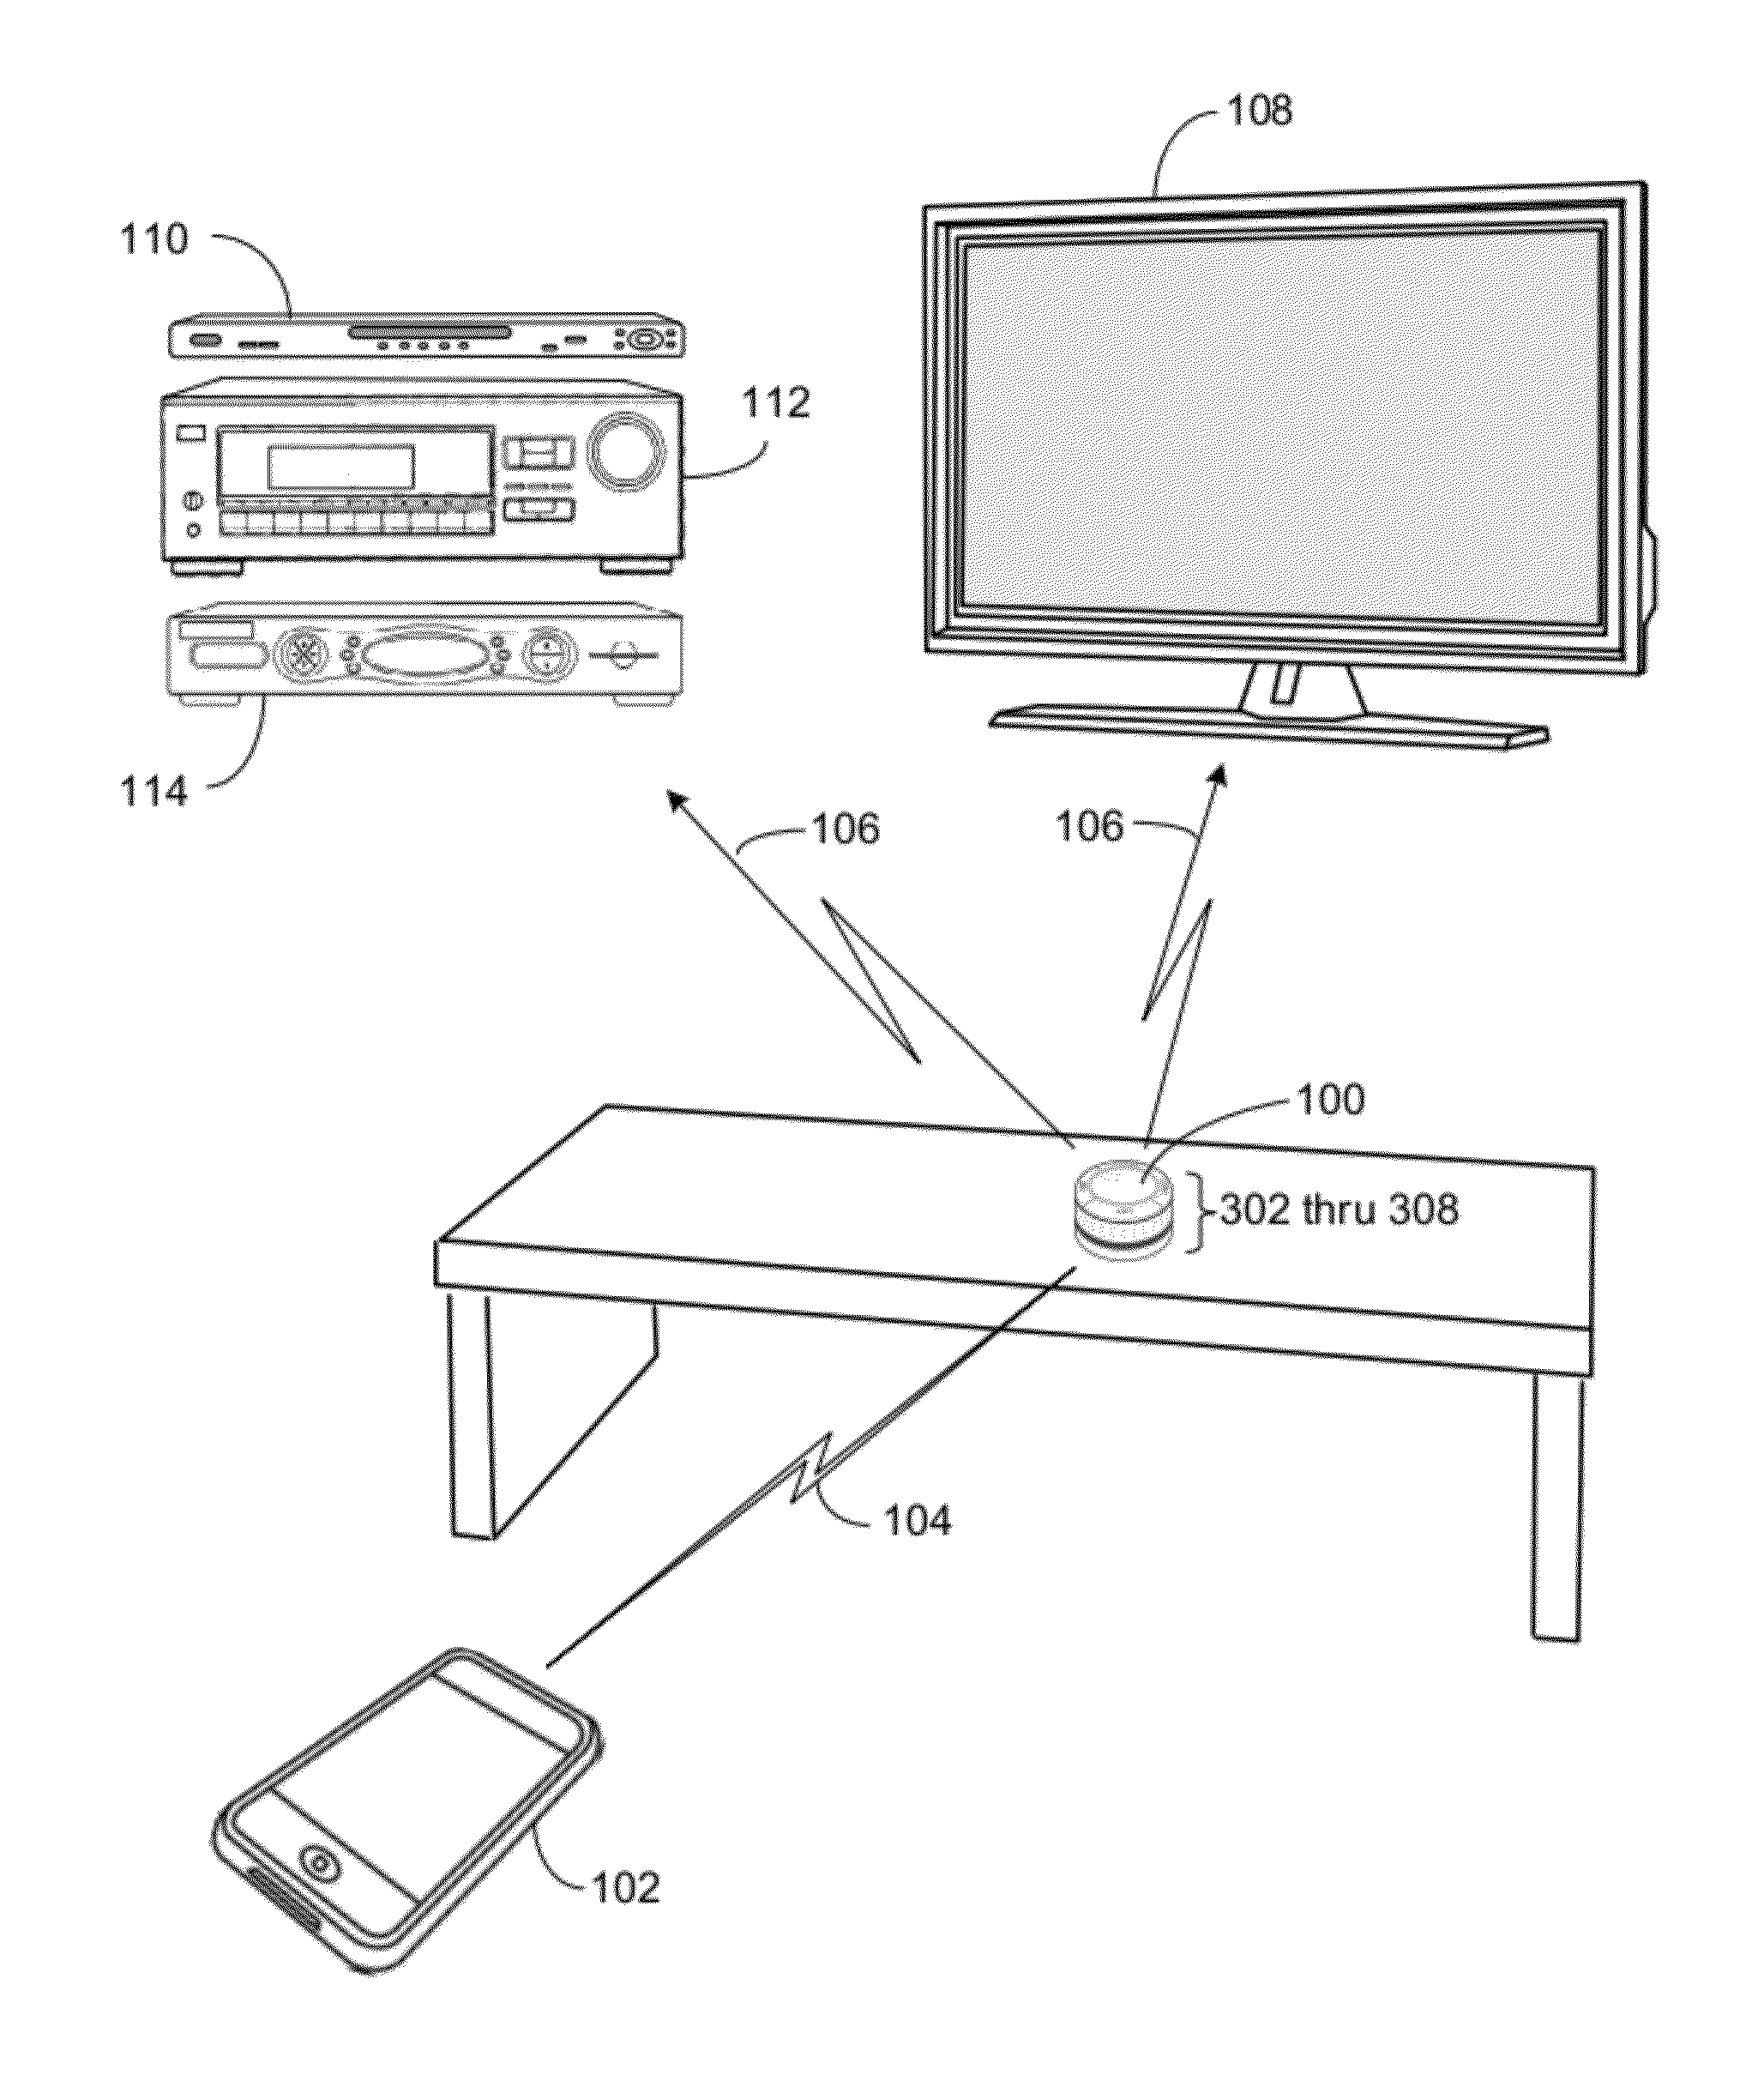 System and method for facilitating appliance control via a smart device